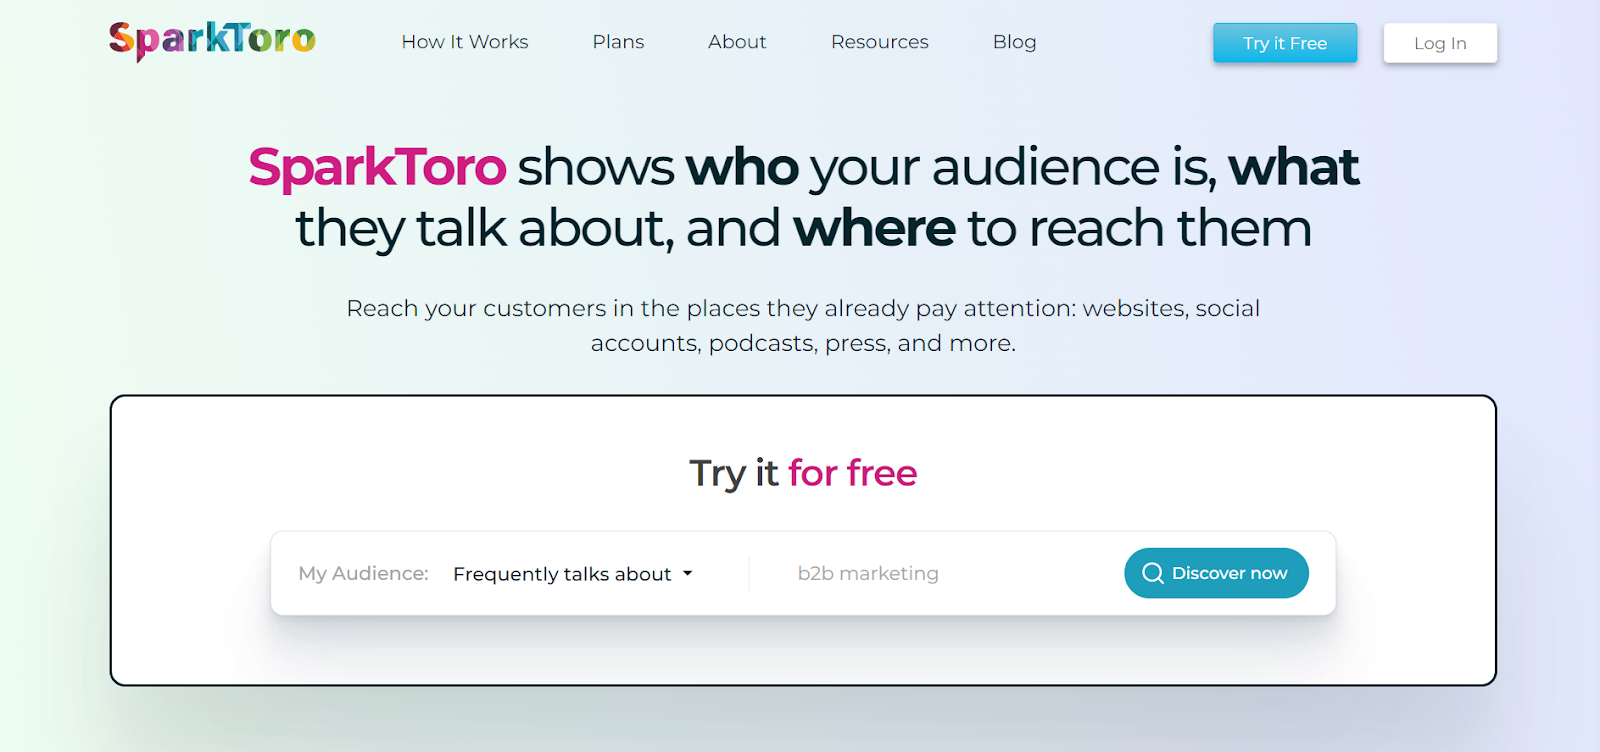 SparkToro is an audience research platform and trend tracker cofounded by Rand Fishkin, former CEO of Moz.